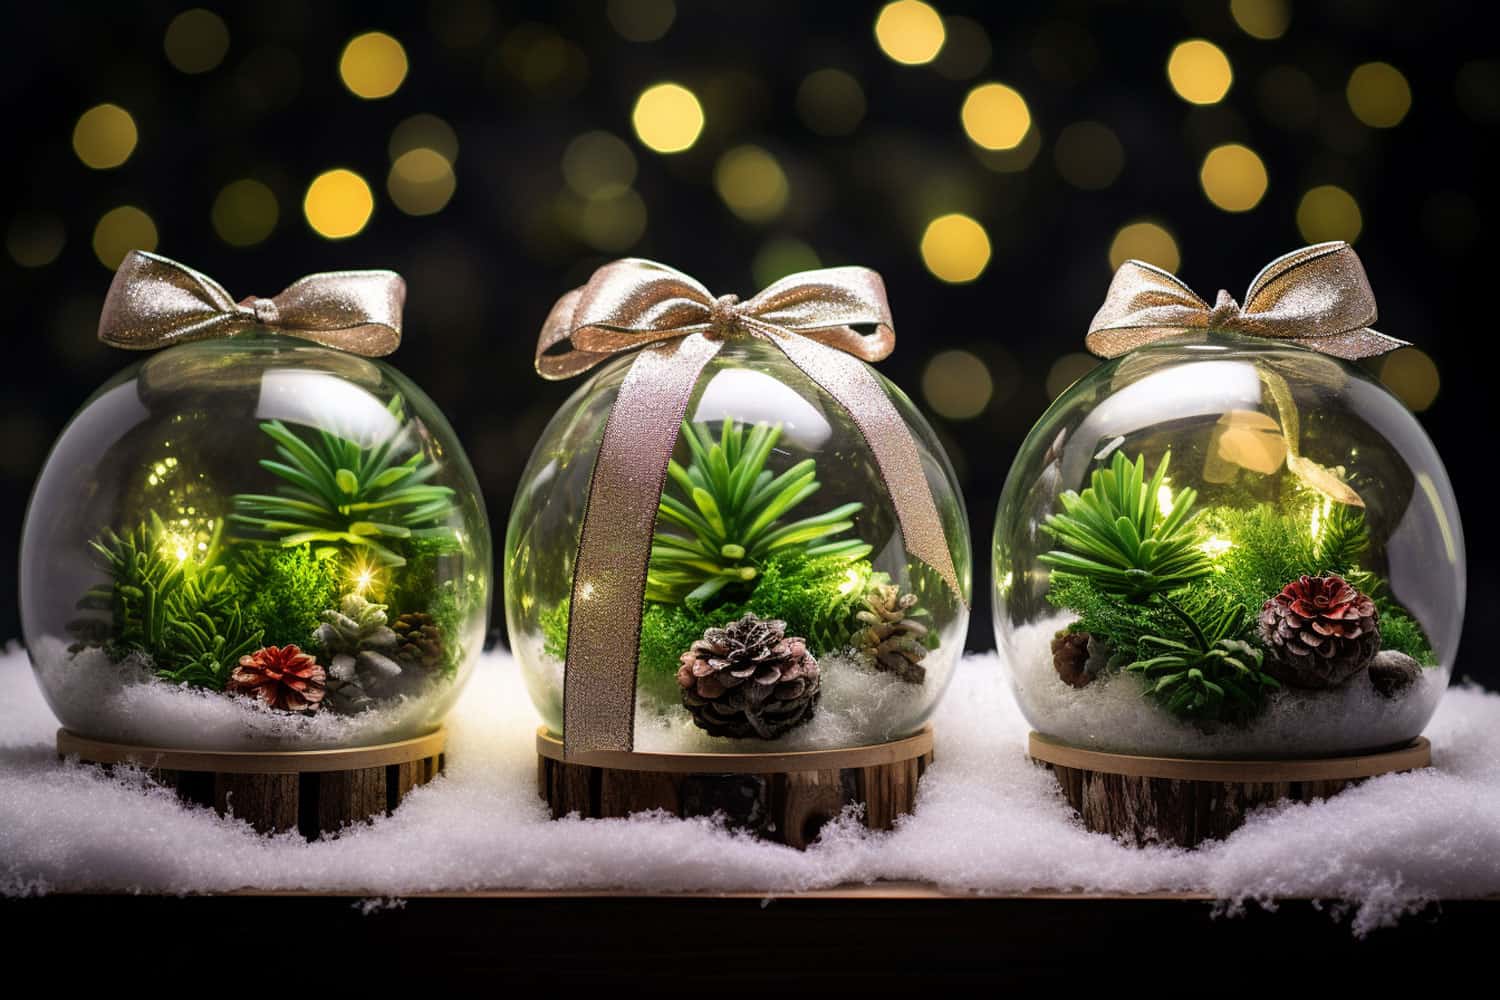 three glass terrarium ornaments on a faux snowy surface, each containing succulents, pine cones, and glittery baubles